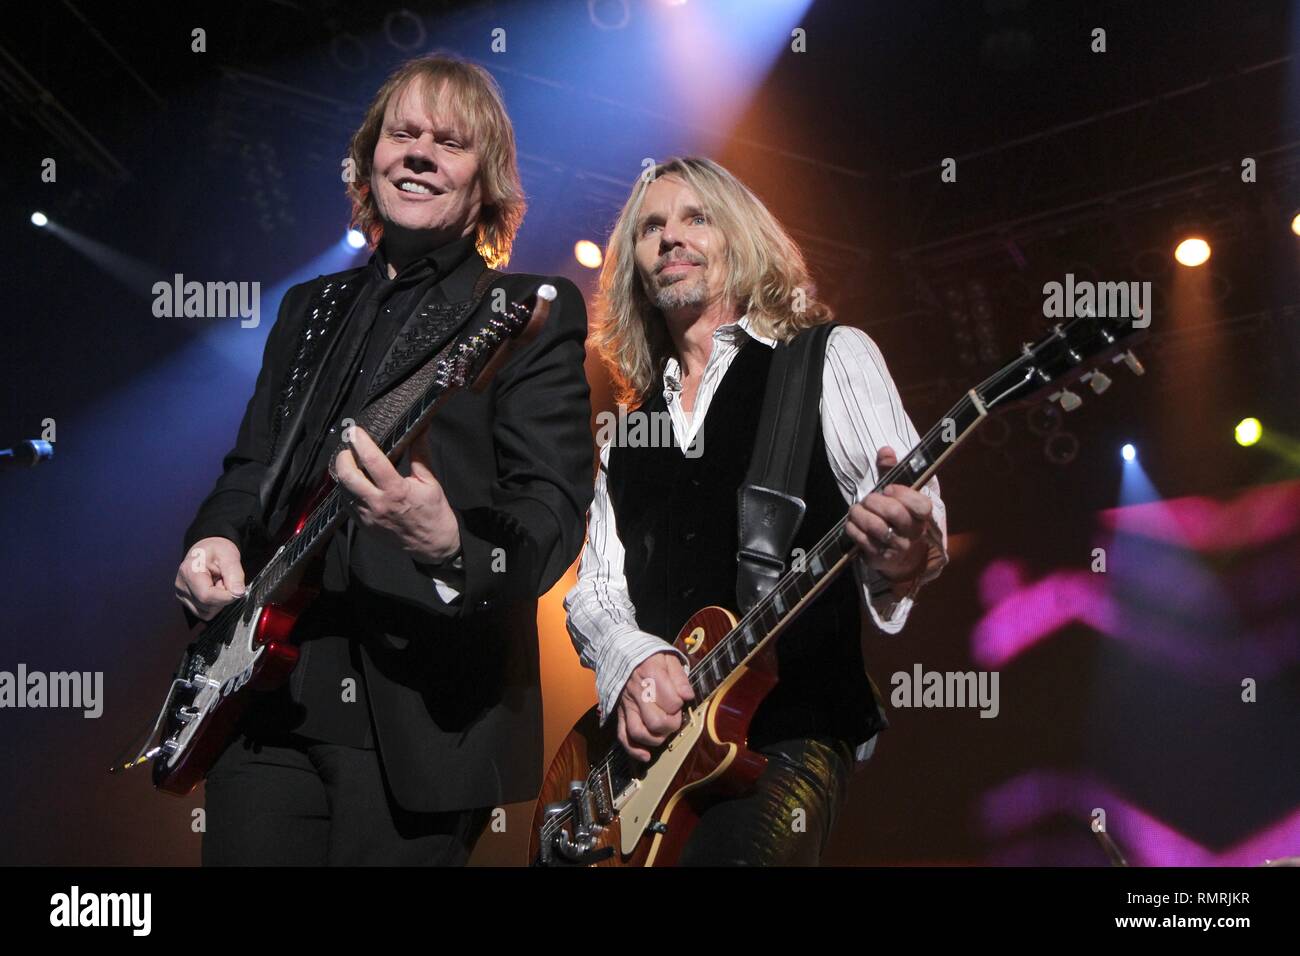 Musicians James Young and Tommy Shaw are shown performing on stage during a 'live' concert appearance with Styx. Stock Photo